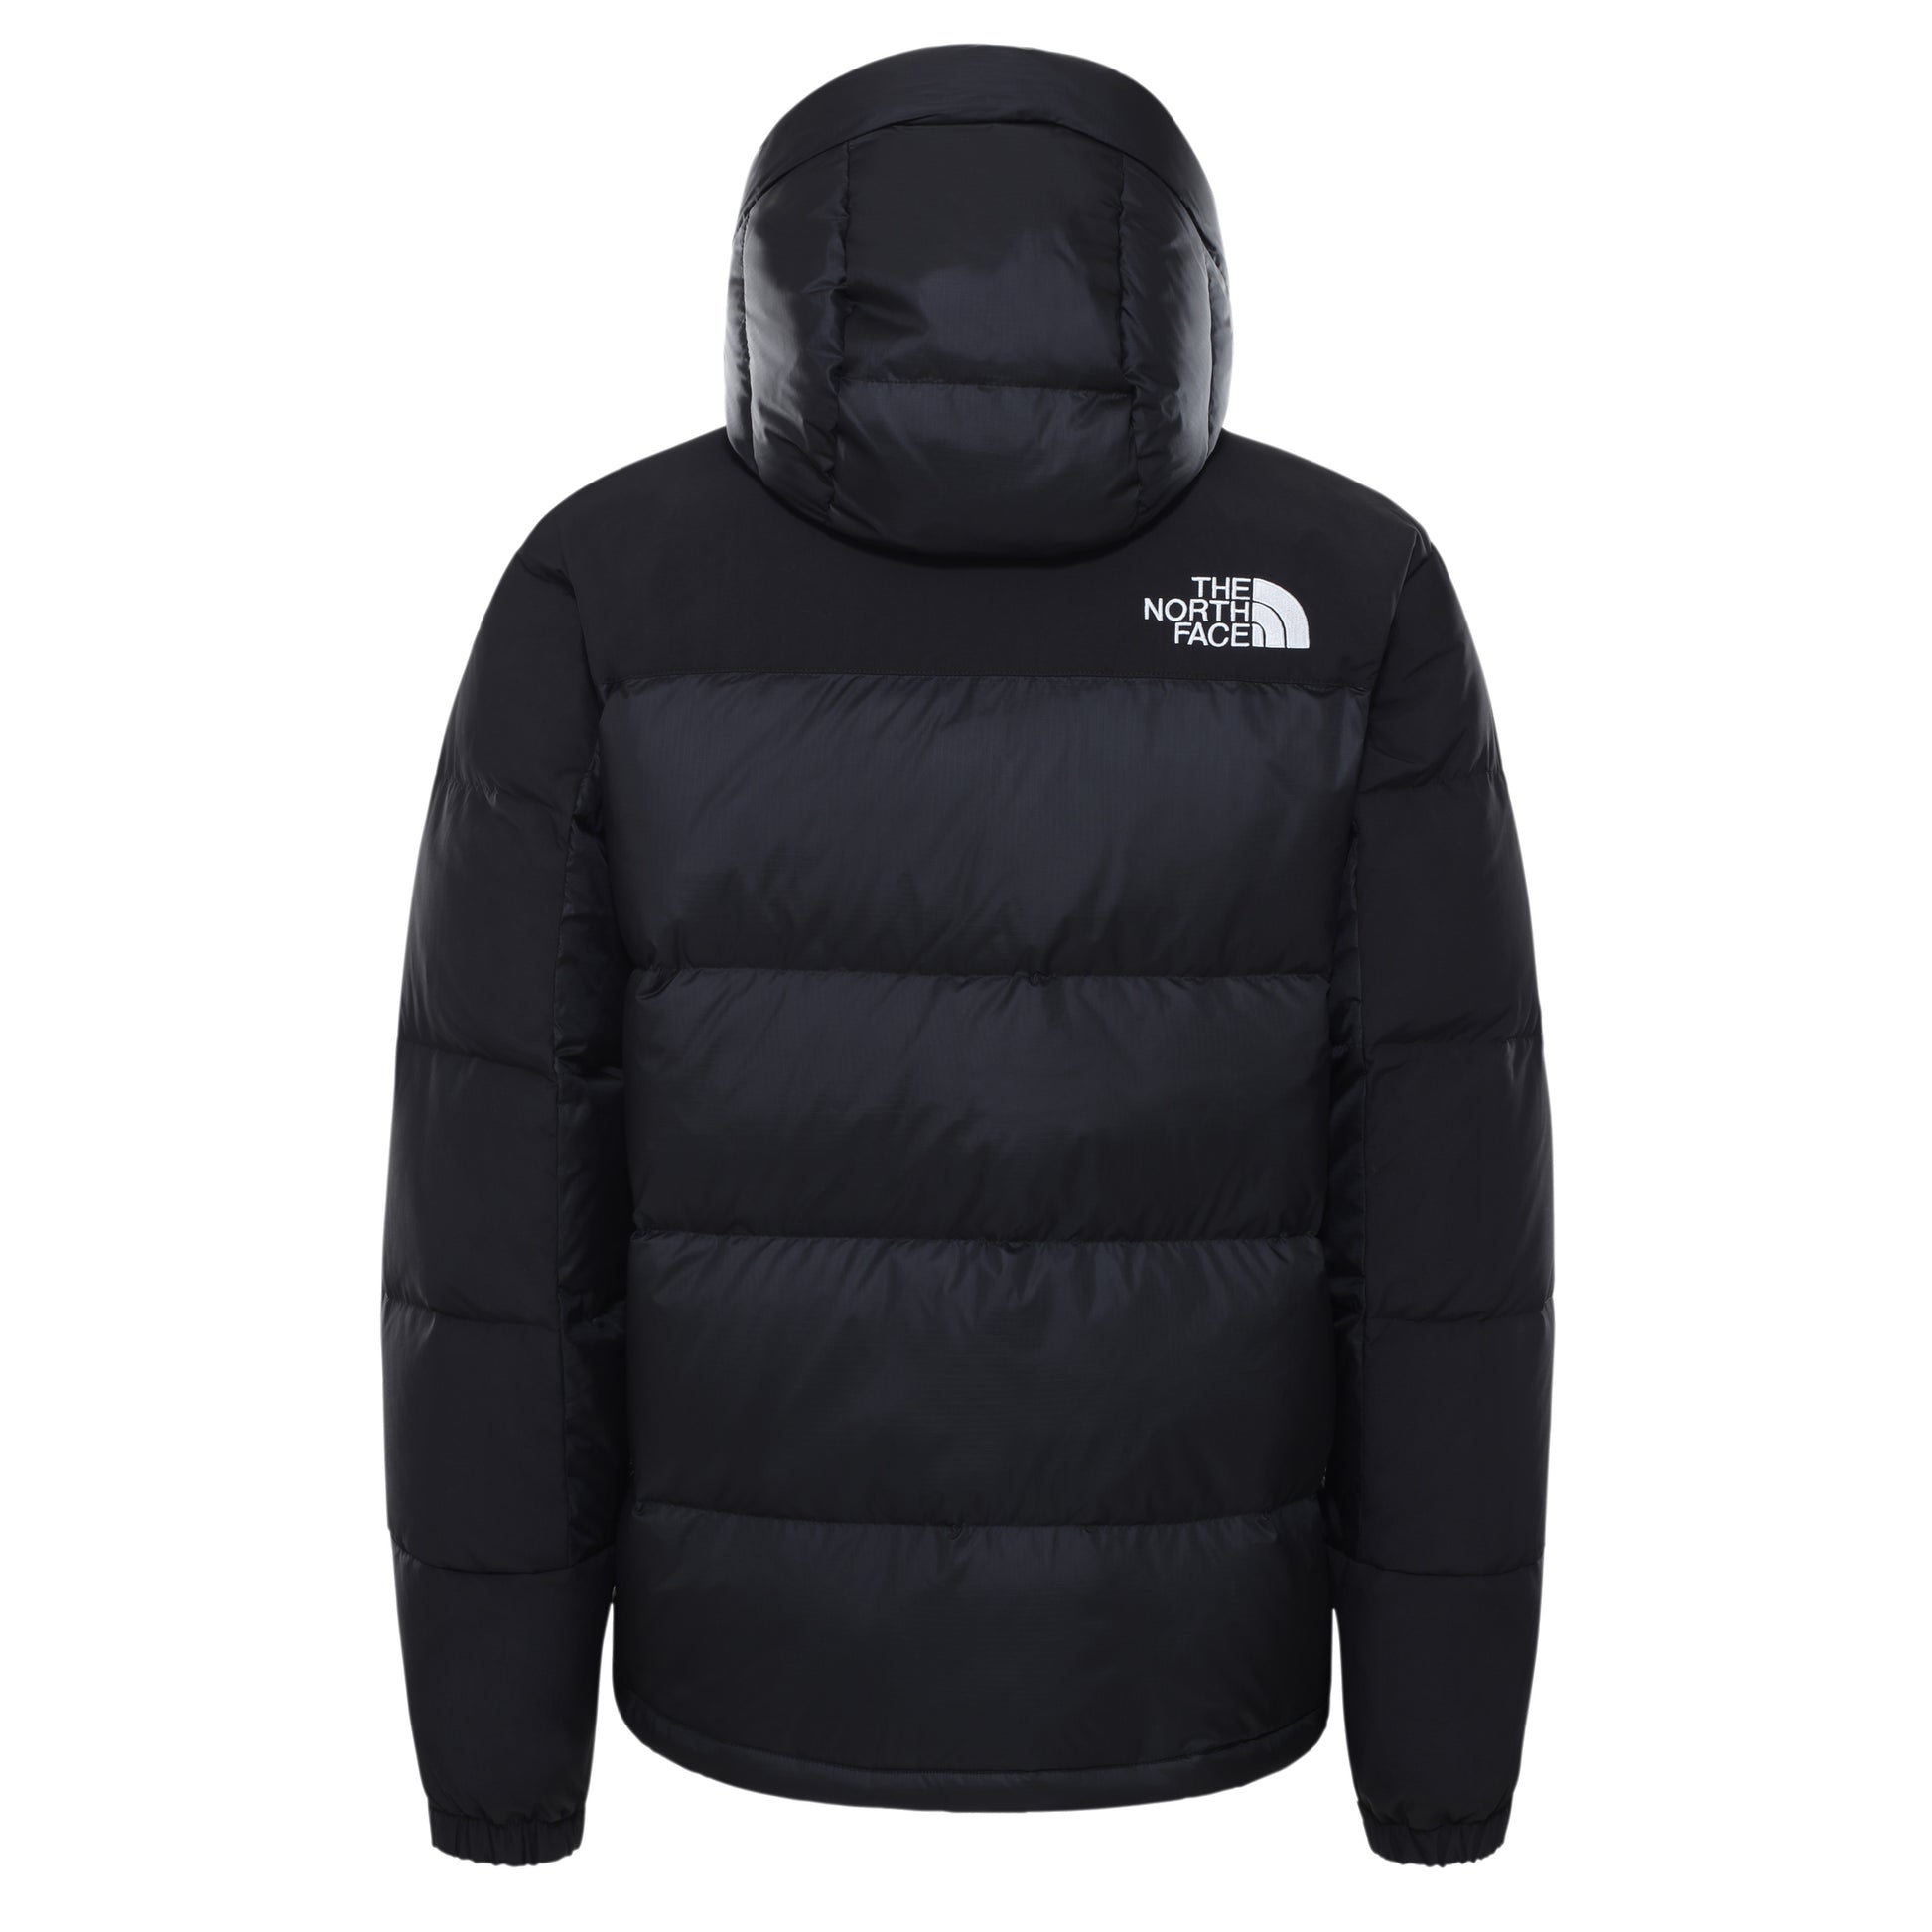 THE NORTH FACE HIMALAYAN JACKET - TNF BLACK freeshipping - FREESTYLE LLORET